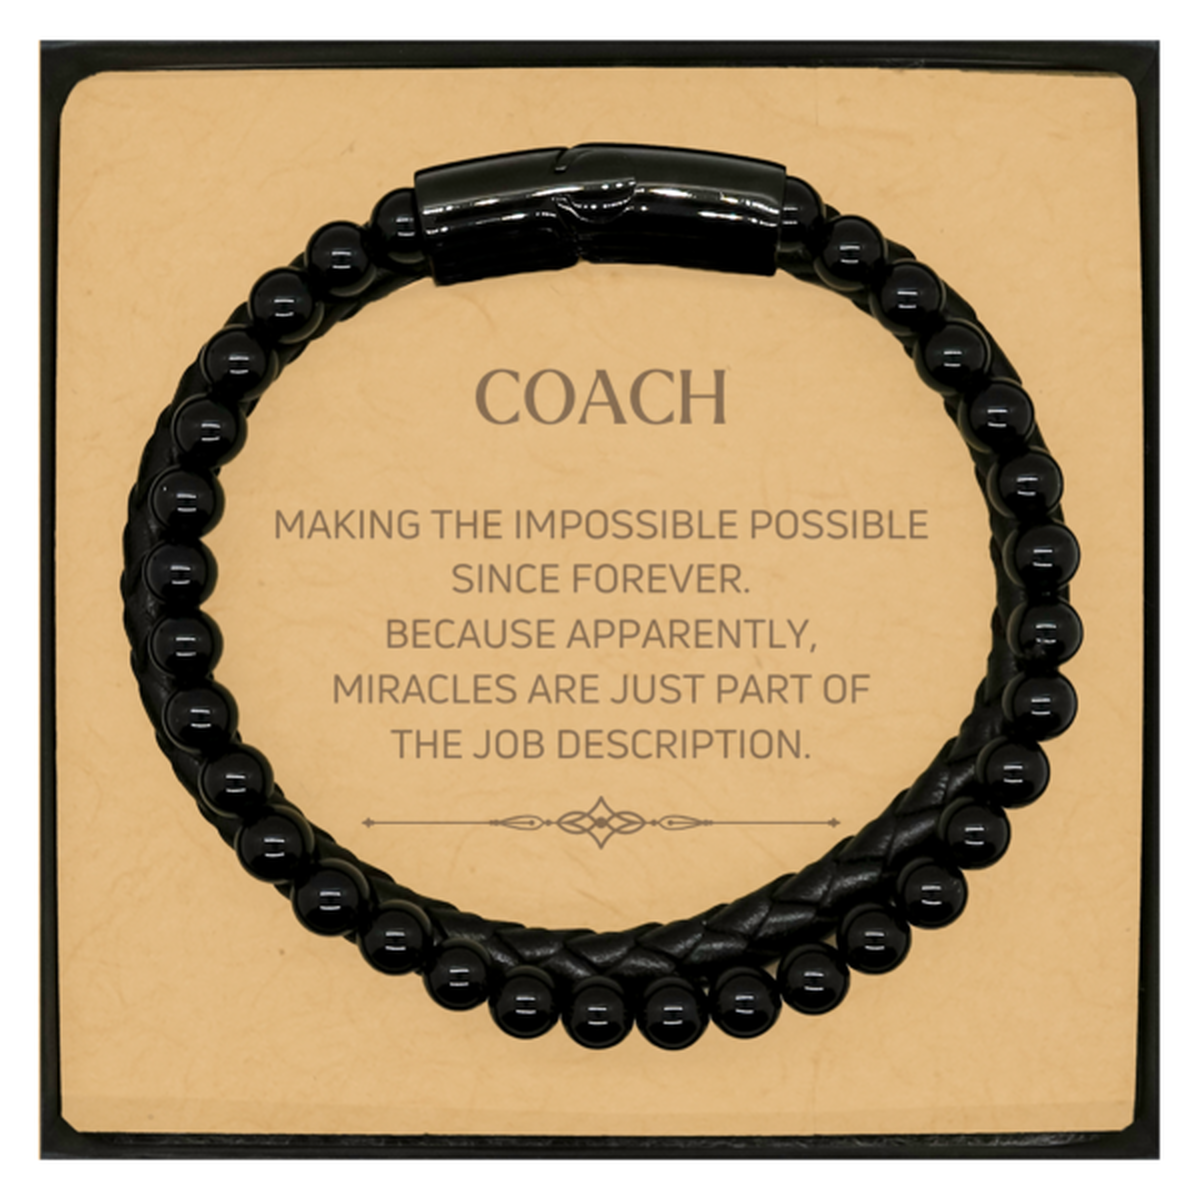 Funny Coach Gifts, Miracles are just part of the job description, Inspirational Birthday Christmas Stone Leather Bracelets For Coach, Men, Women, Coworkers, Friends, Boss